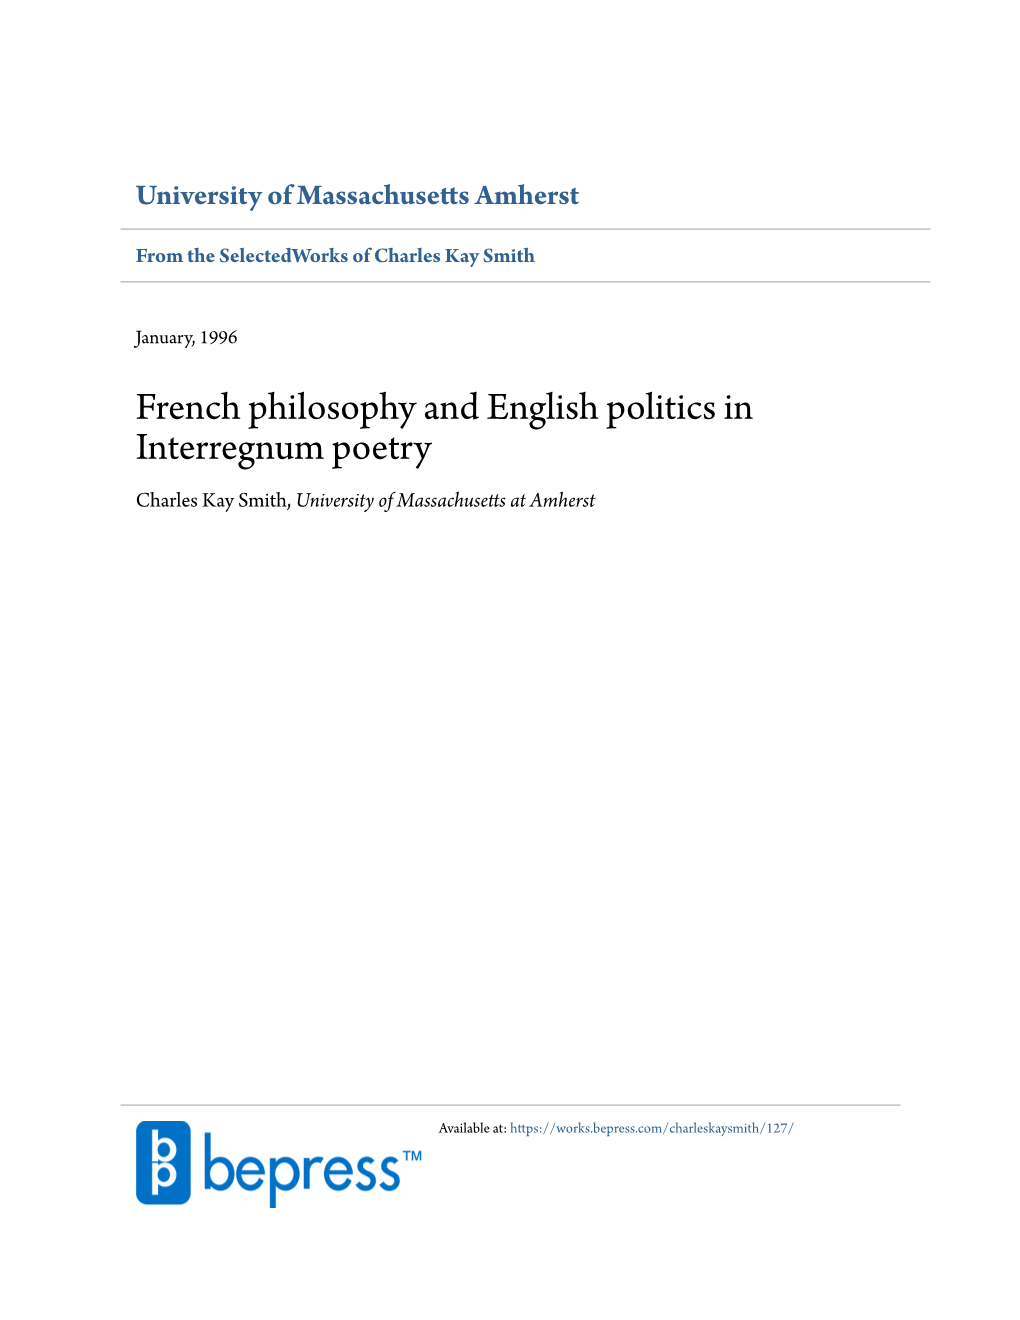 French Philosophy and English Politics in Interregnum Poetry Charles Kay Smith, University of Massachusetts Ta Amherst